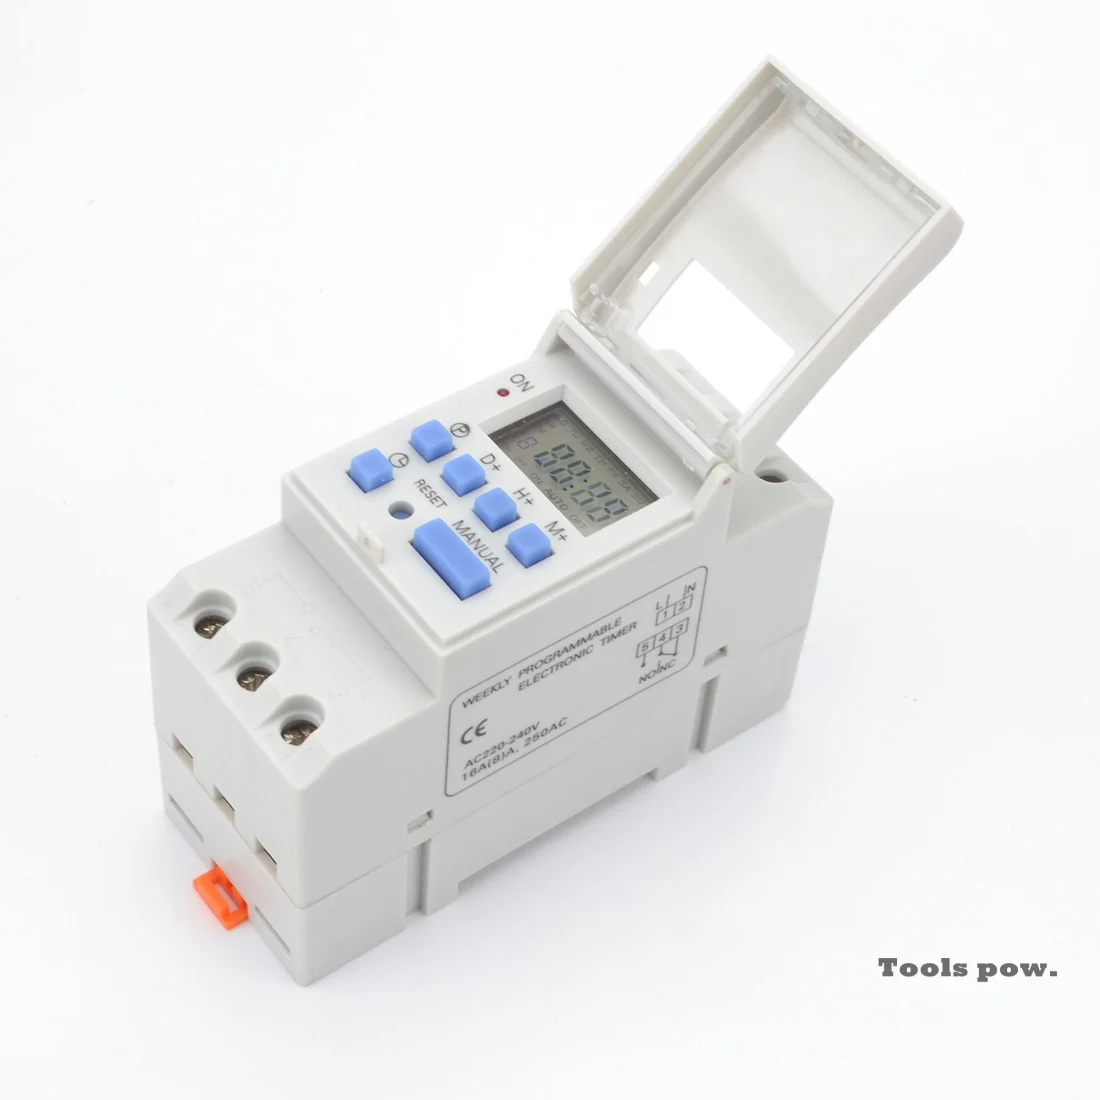 

Programmable Digital TIME SWITCH Relay Timer Weekly 7 Days Control Good Electronic Din Rail Mount AC 220V / 110V DC 12V 16A LCD